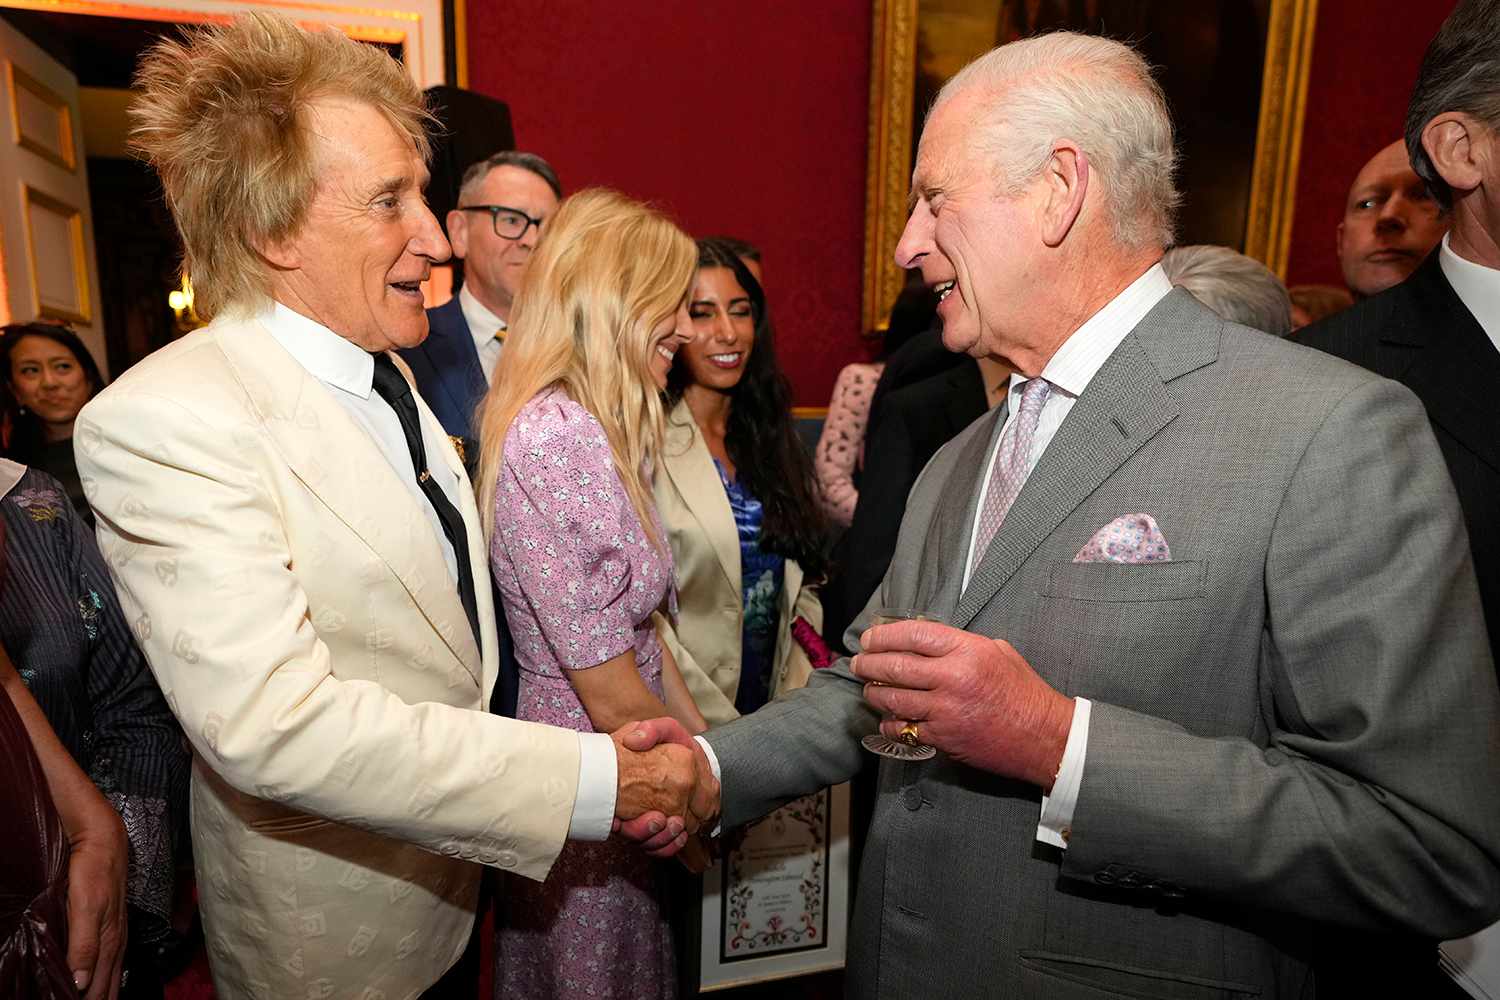 King Charles Mentioned His Cancer Treatment to Rod Stewart [Video]